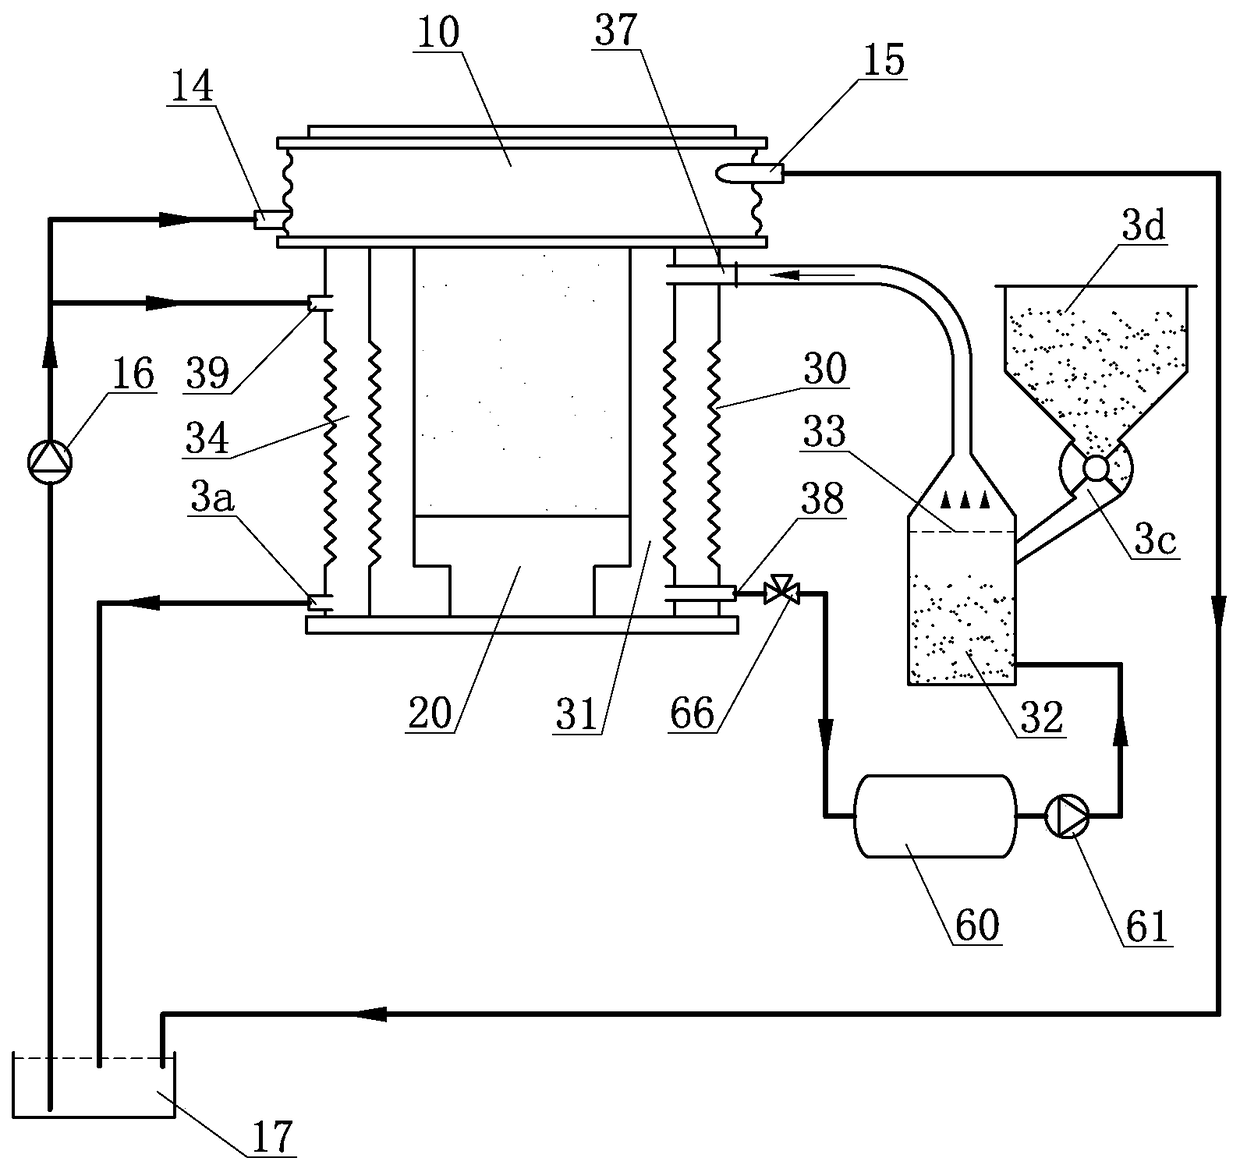 Novel cooling method and device applied to semi-continuous casting of magnesium alloy